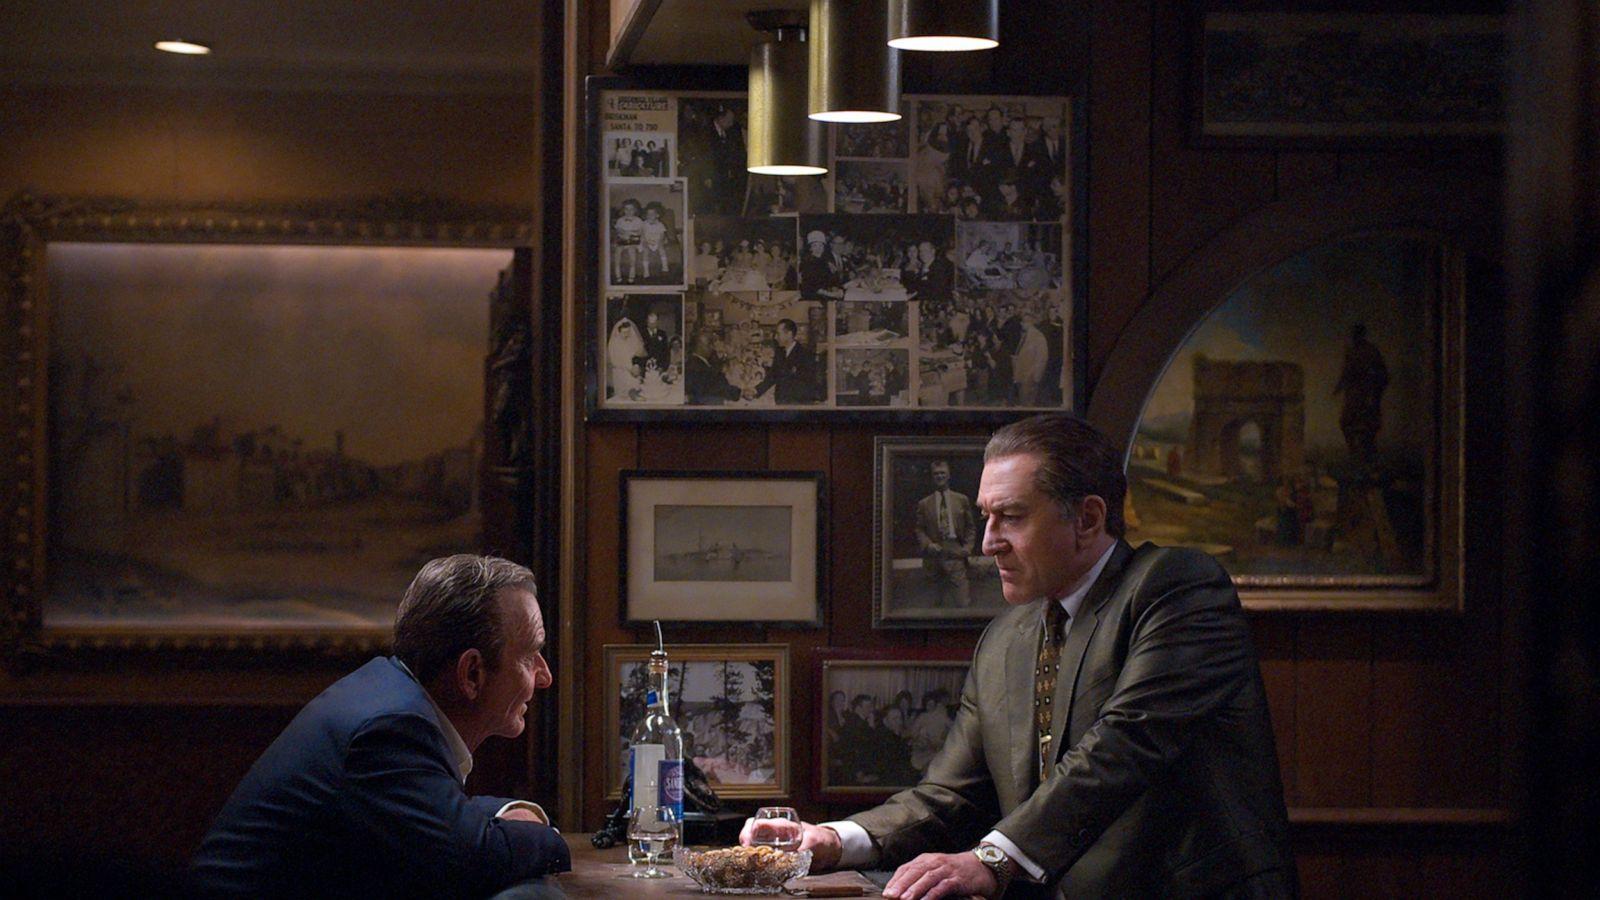 Review: Scorsese's 'The Irishman' is mature and melancholy